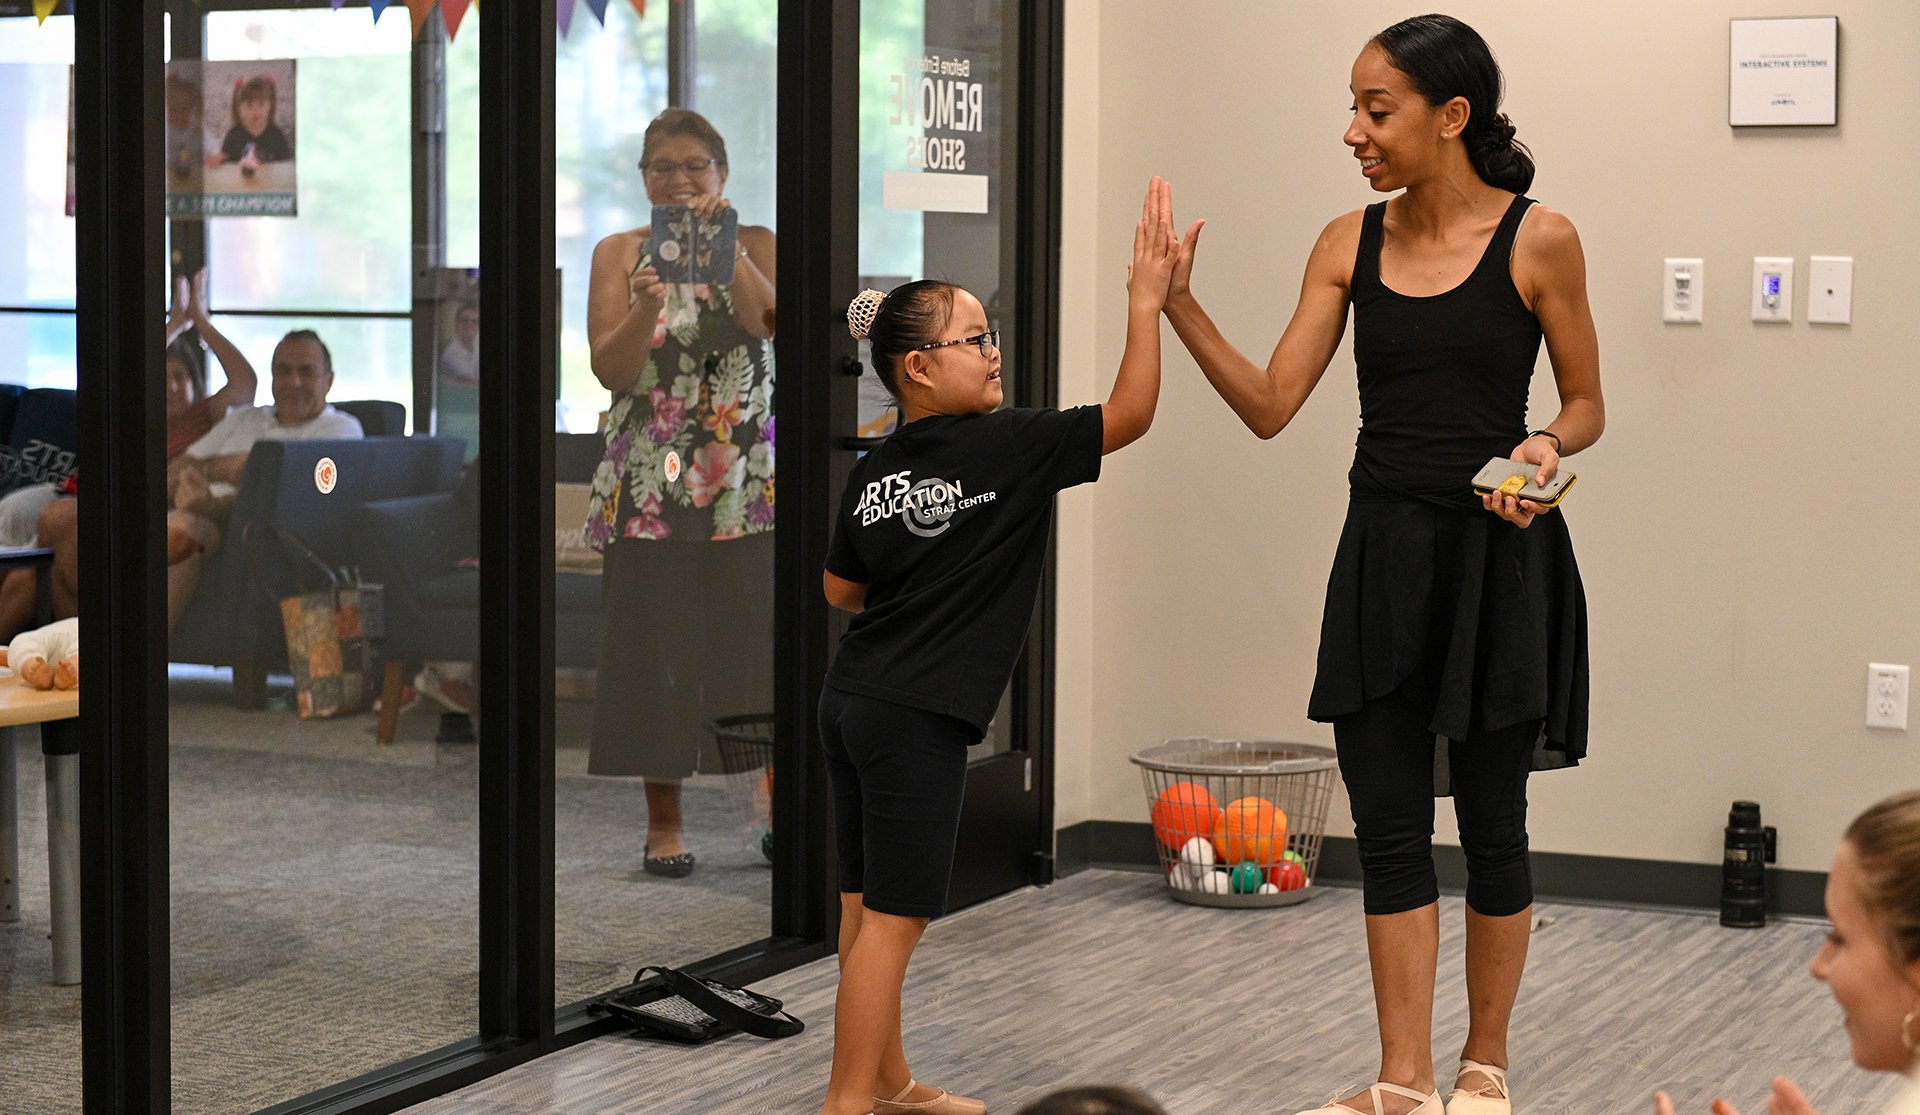 ballet teaching is giving student a high five